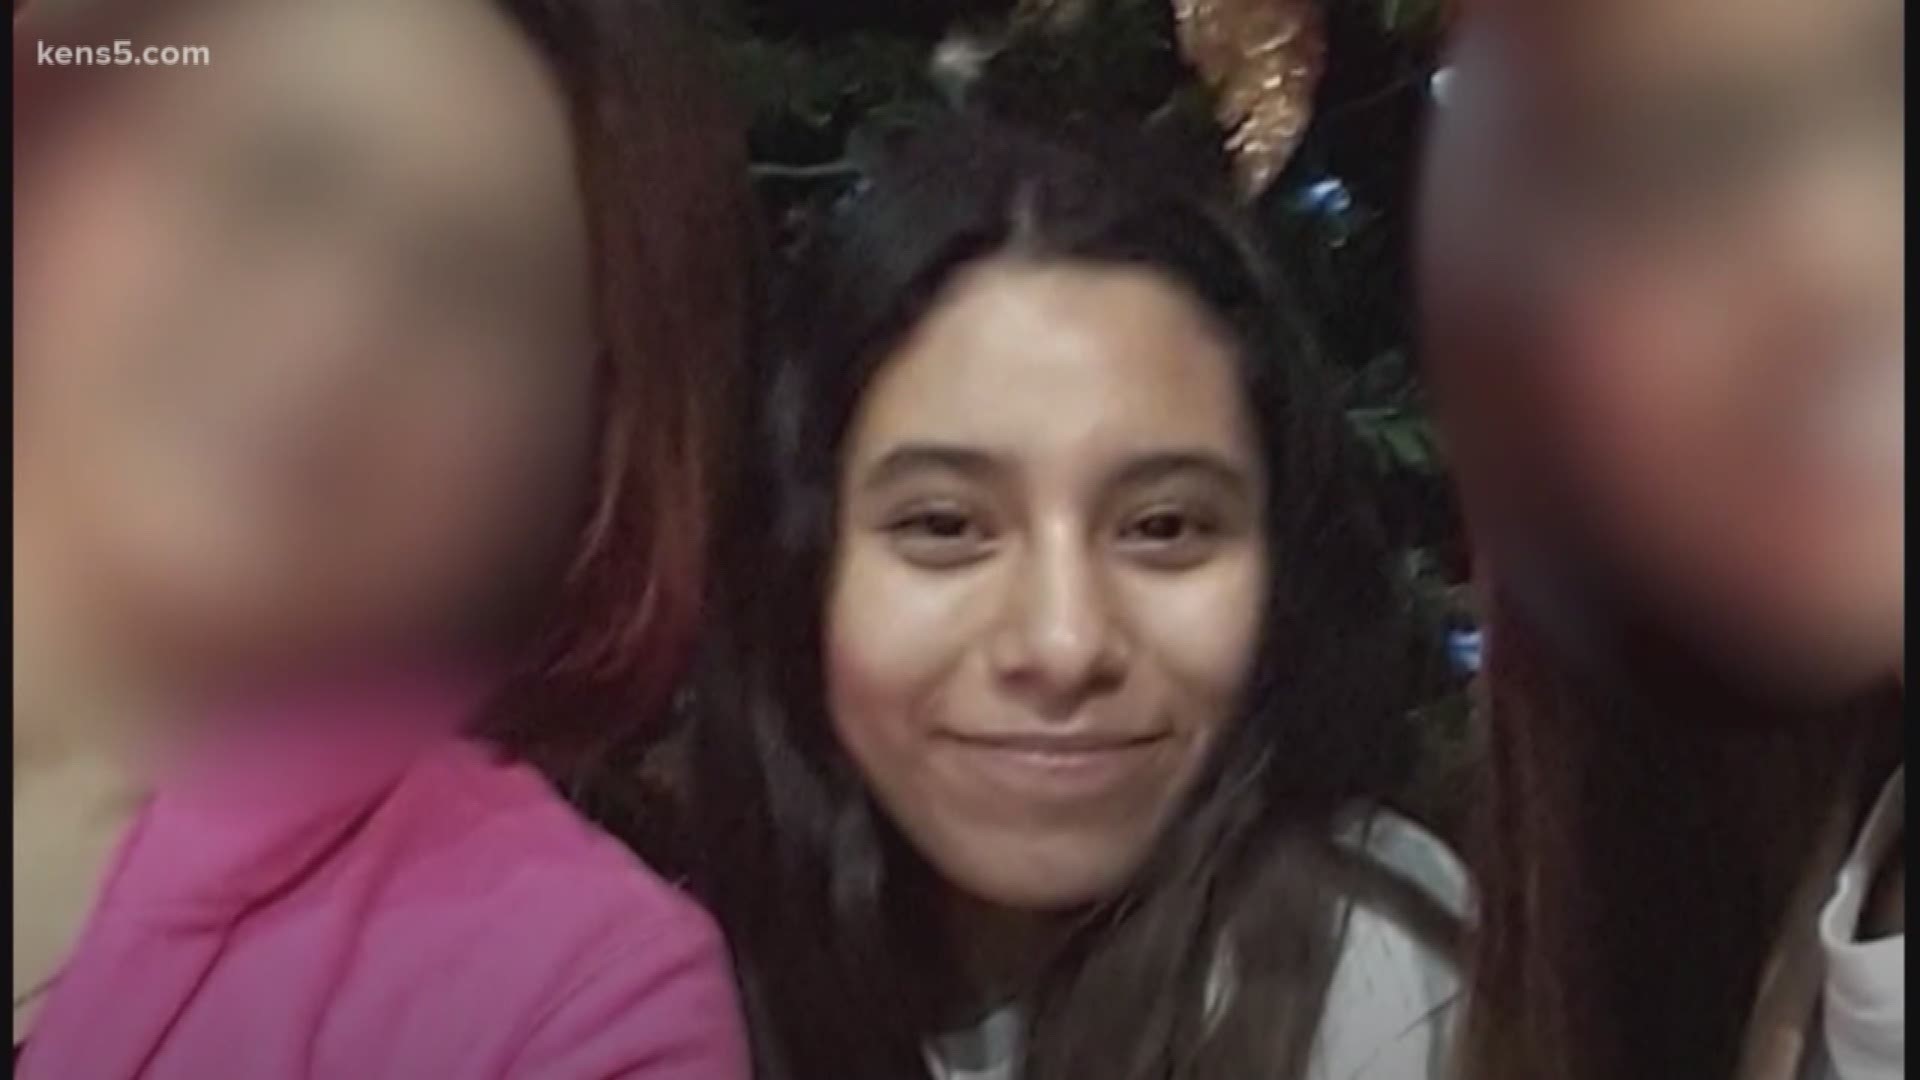 It's been more than a month since Eva Garcia left her home after an argument with her father, but the community hasn't stopping searching.